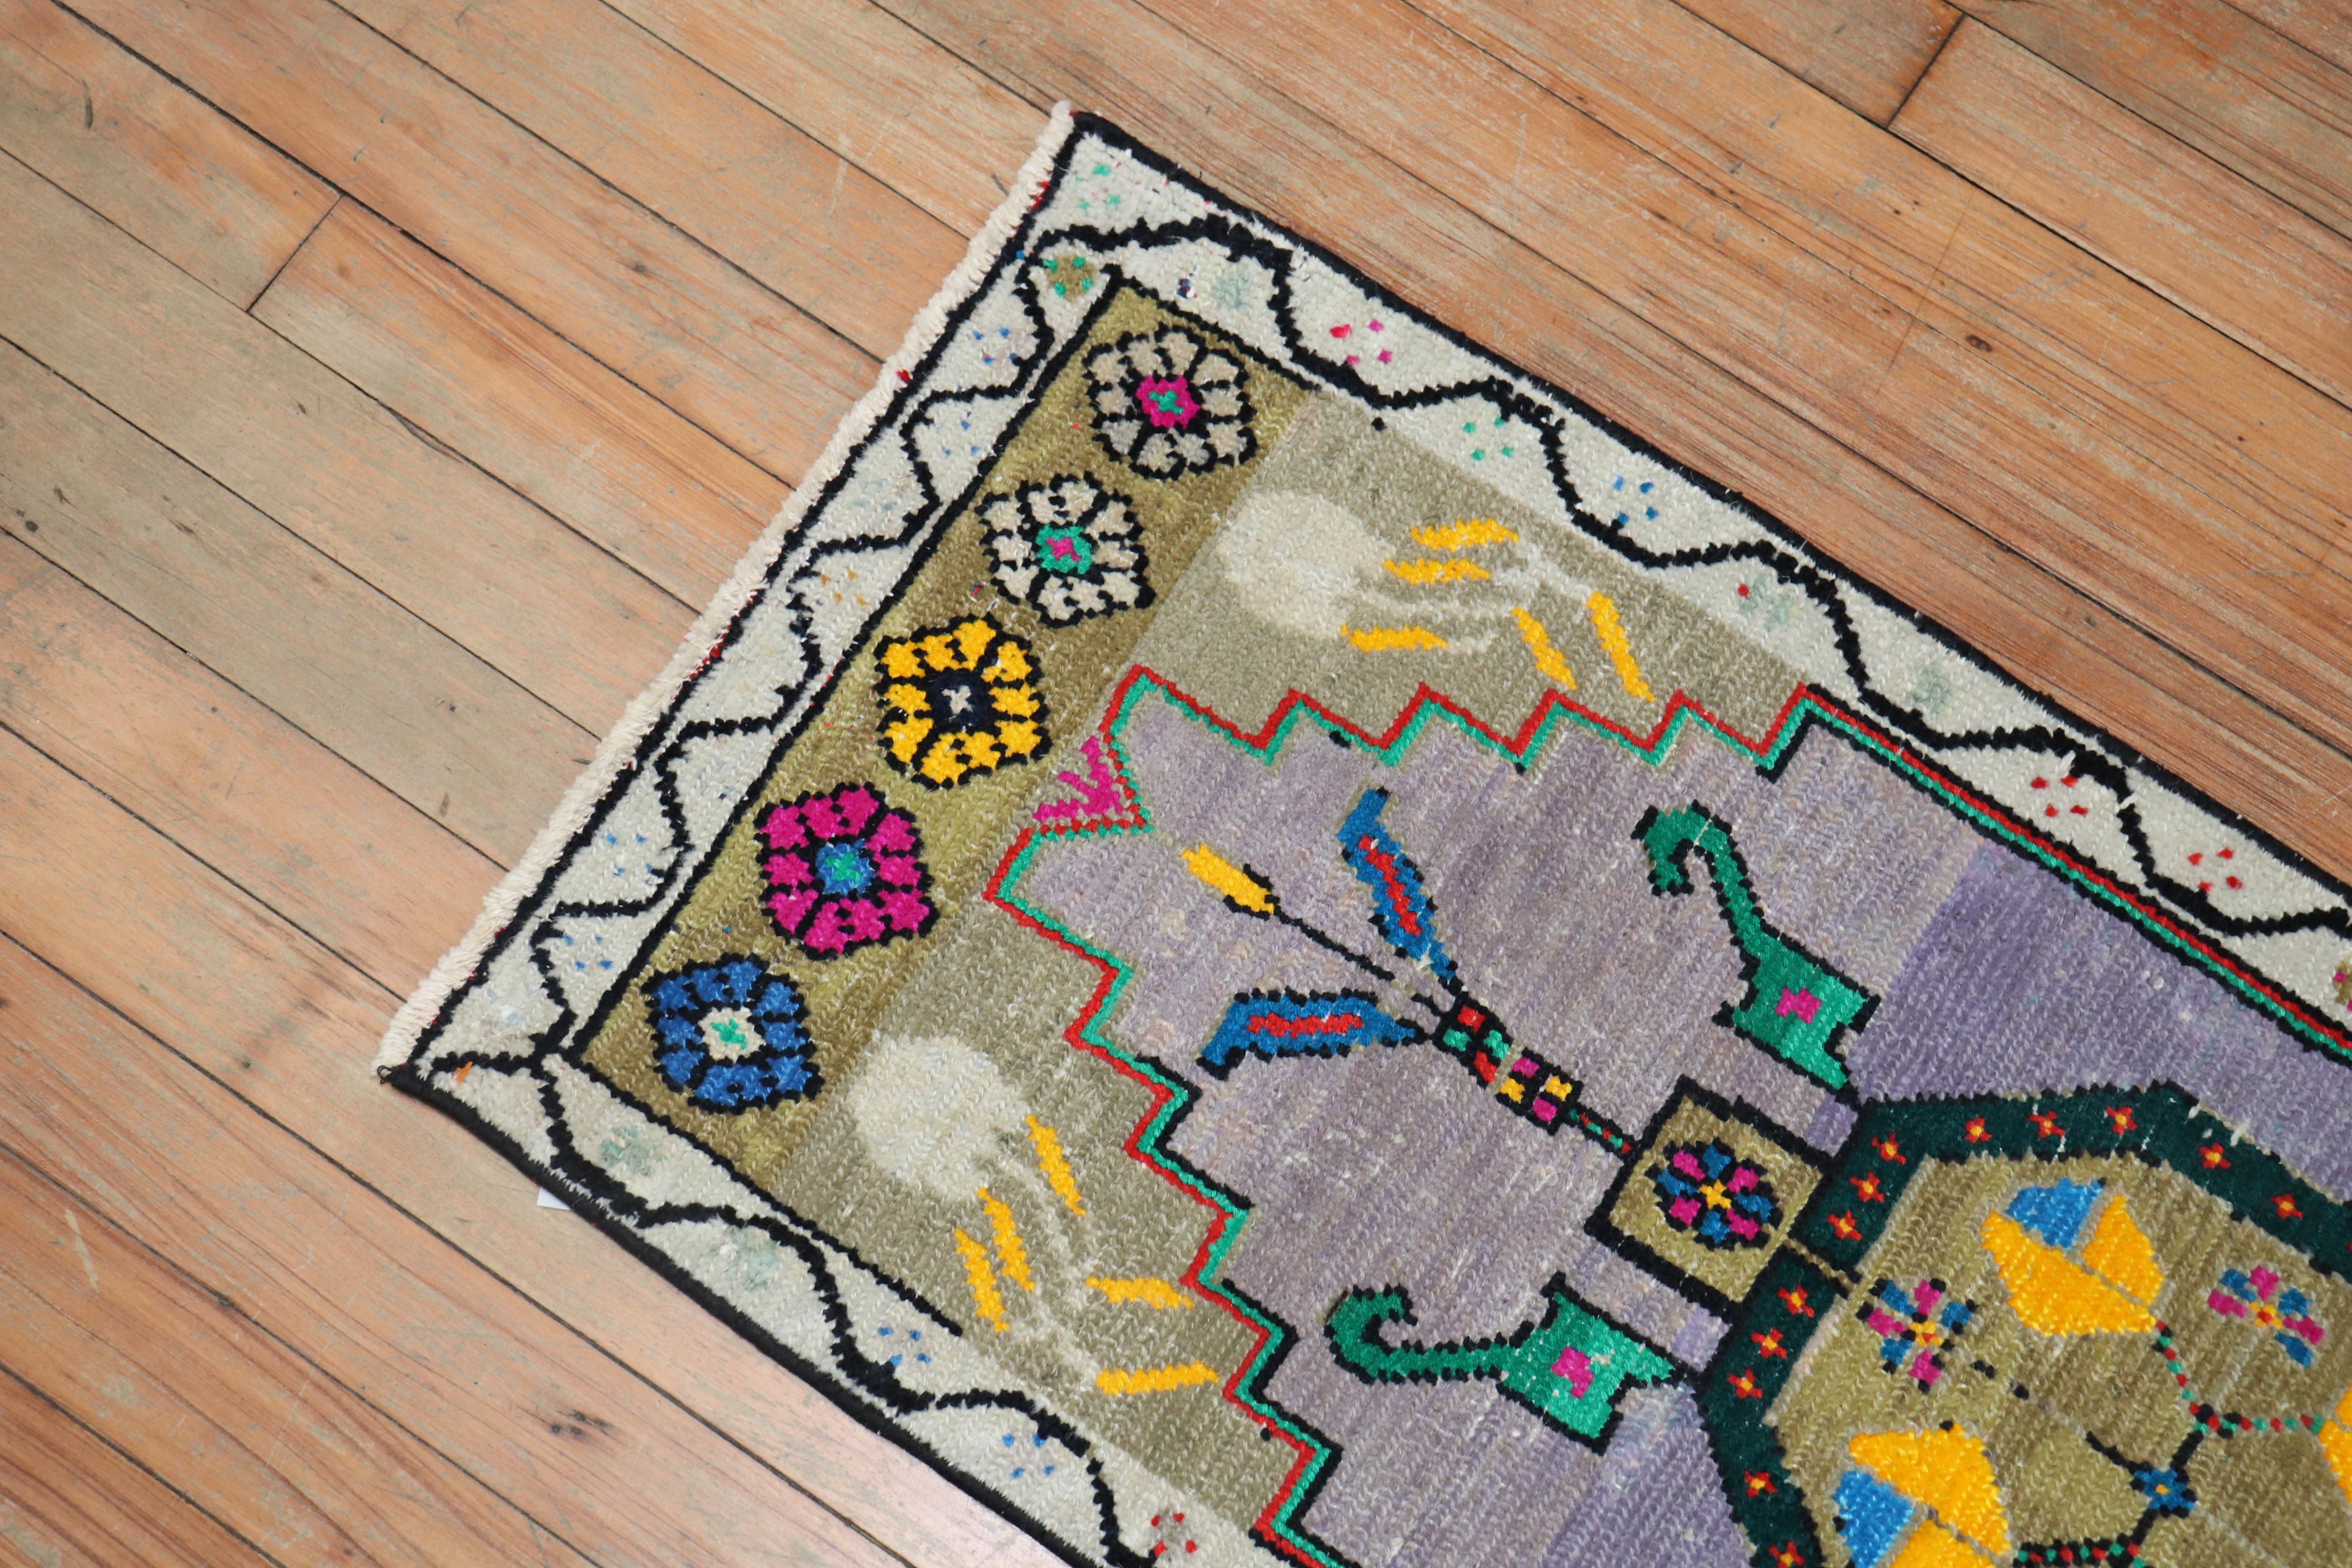 One of a kind vintage Turkish mat from the 20th century. All you got to do is look at the colors! A fun rug indeed

Measures: 1'5